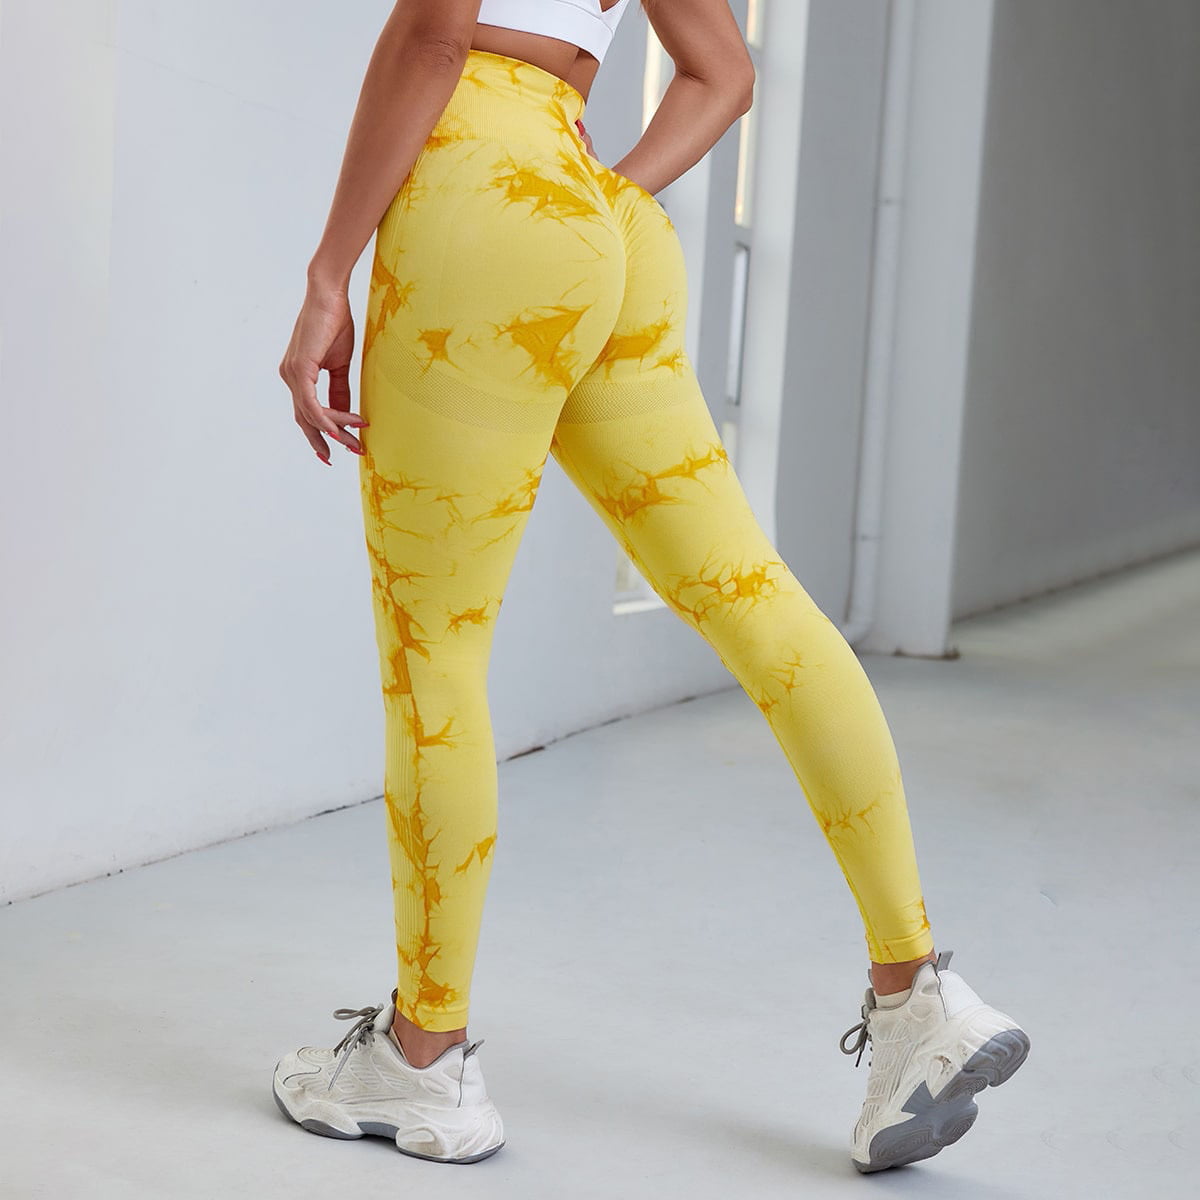 Seamless Tie Yoga For Gym Pants Legging Women Dye Clothing Tights Workout High Ladies Sports Waist Up Fitness Leggings Push